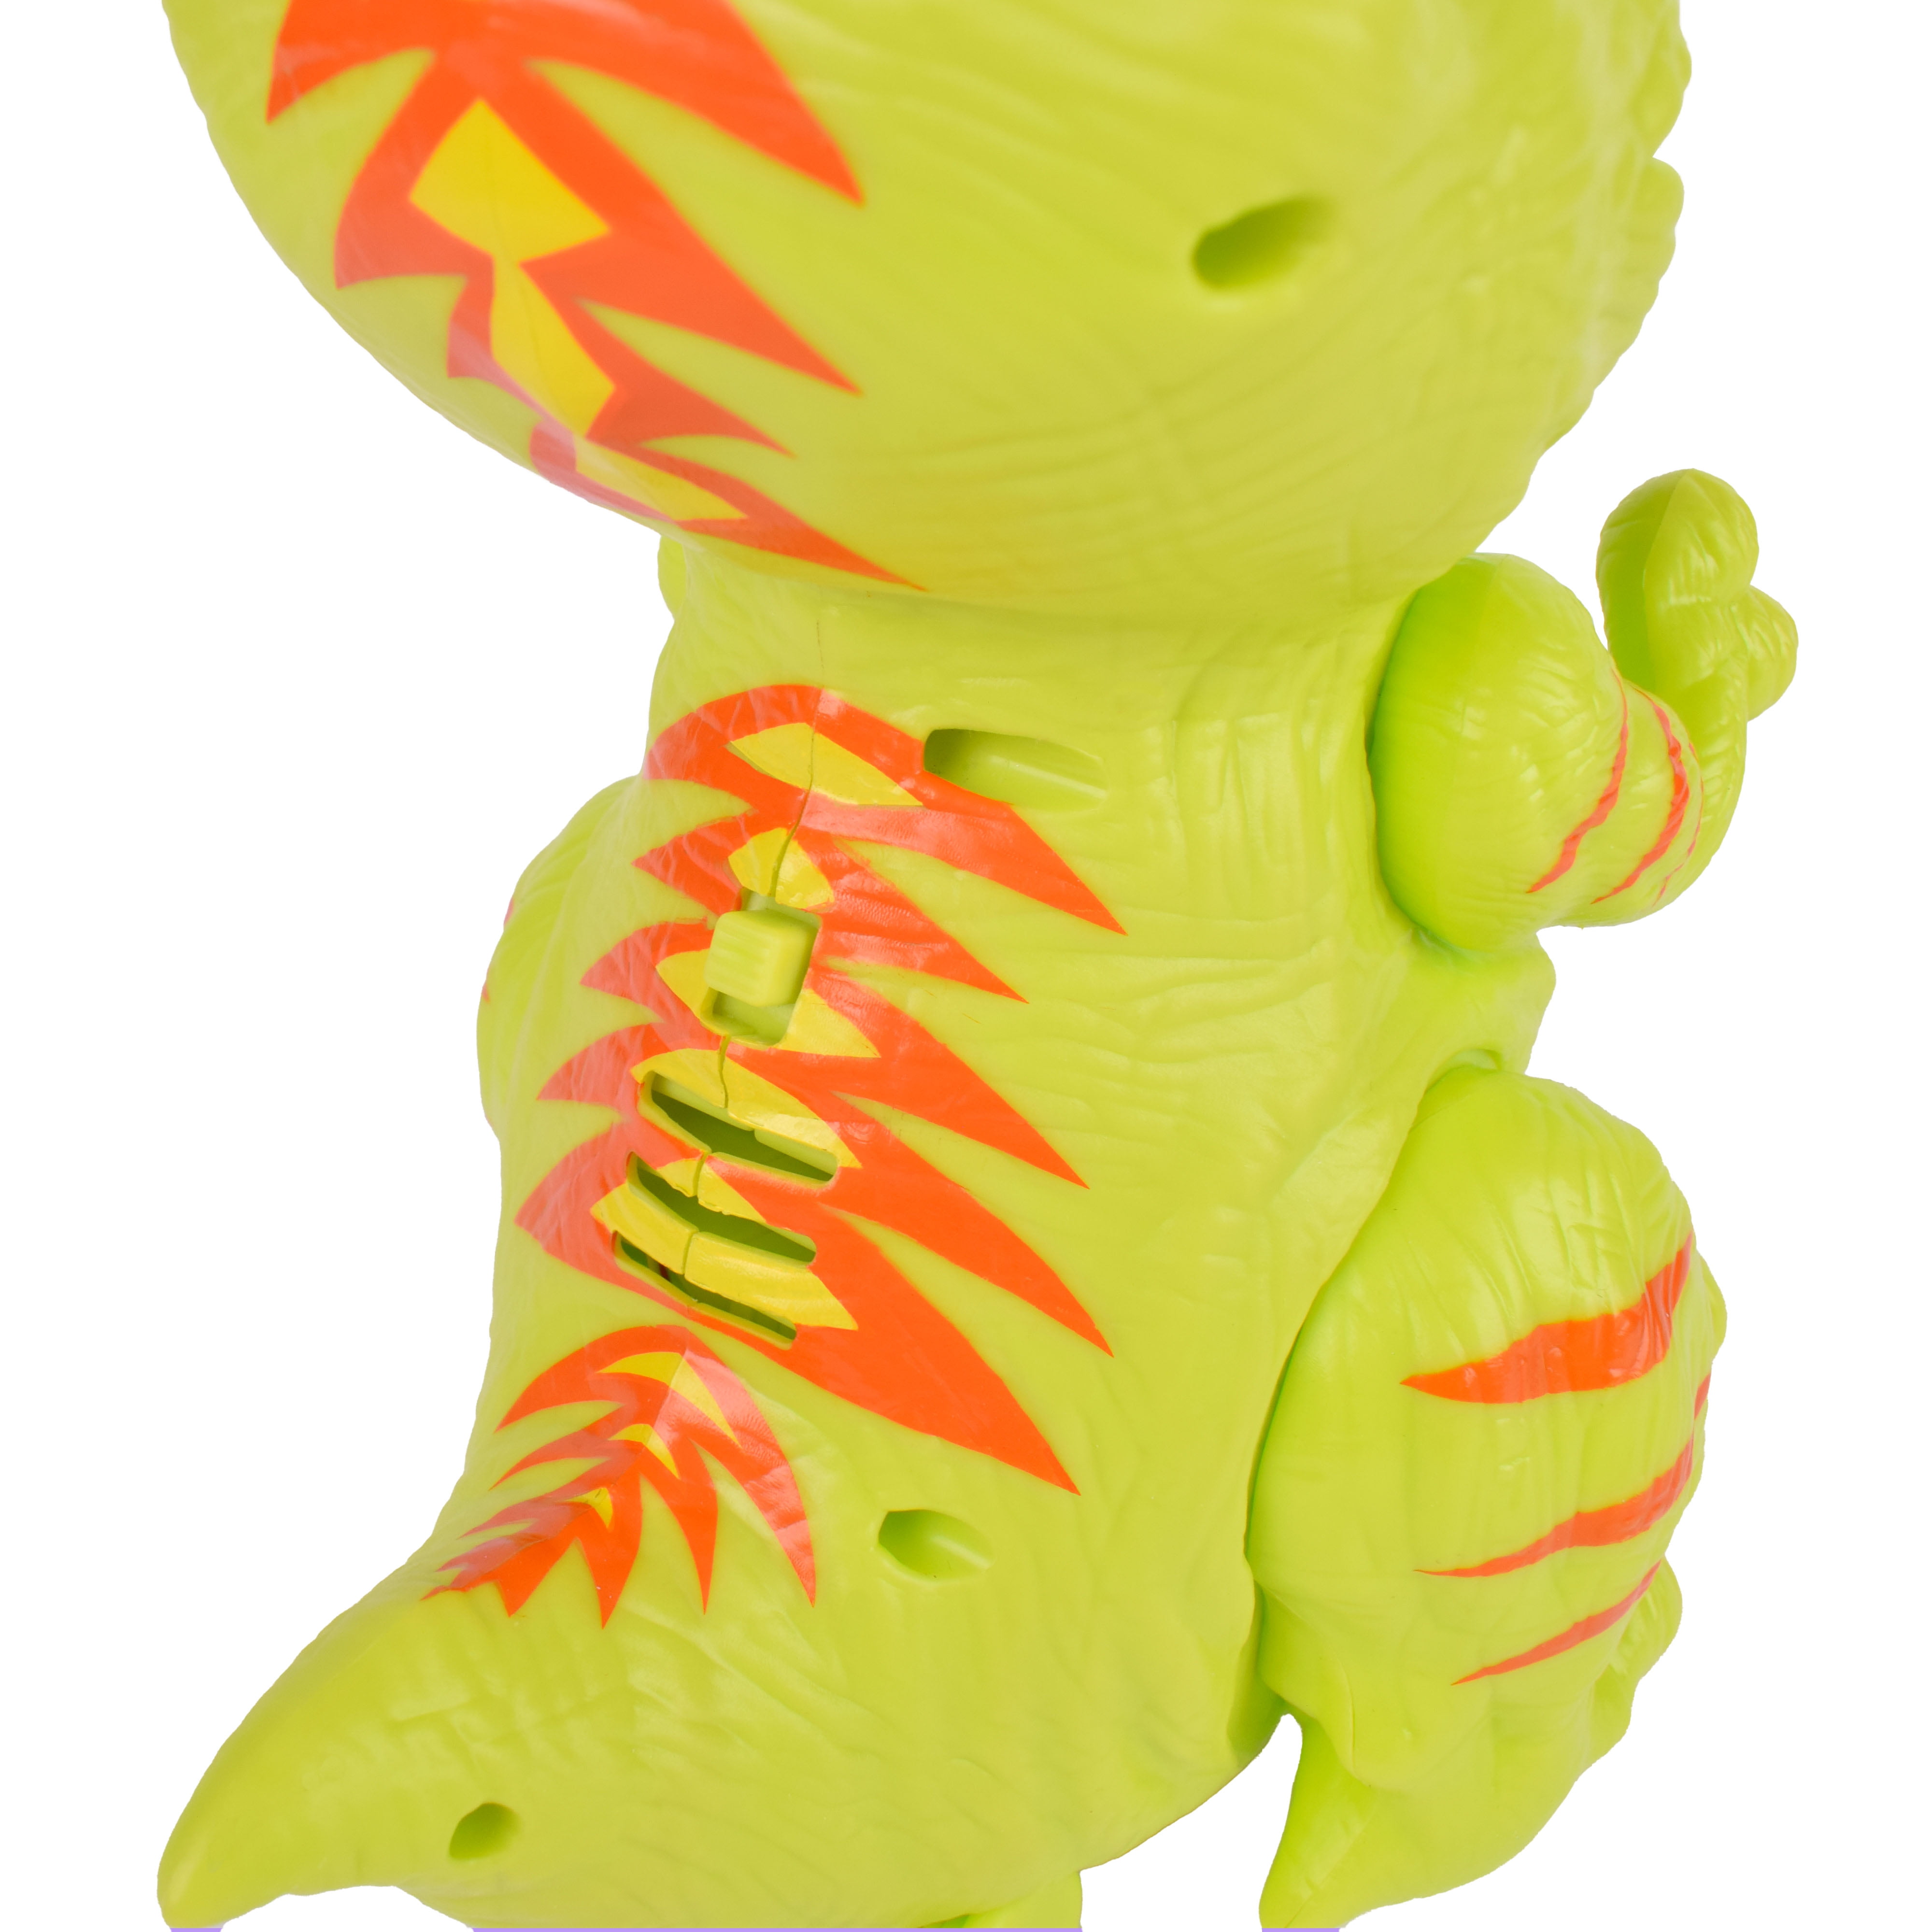 Play Day Dino Bubble Blaster with Lights and Sounds, Includes